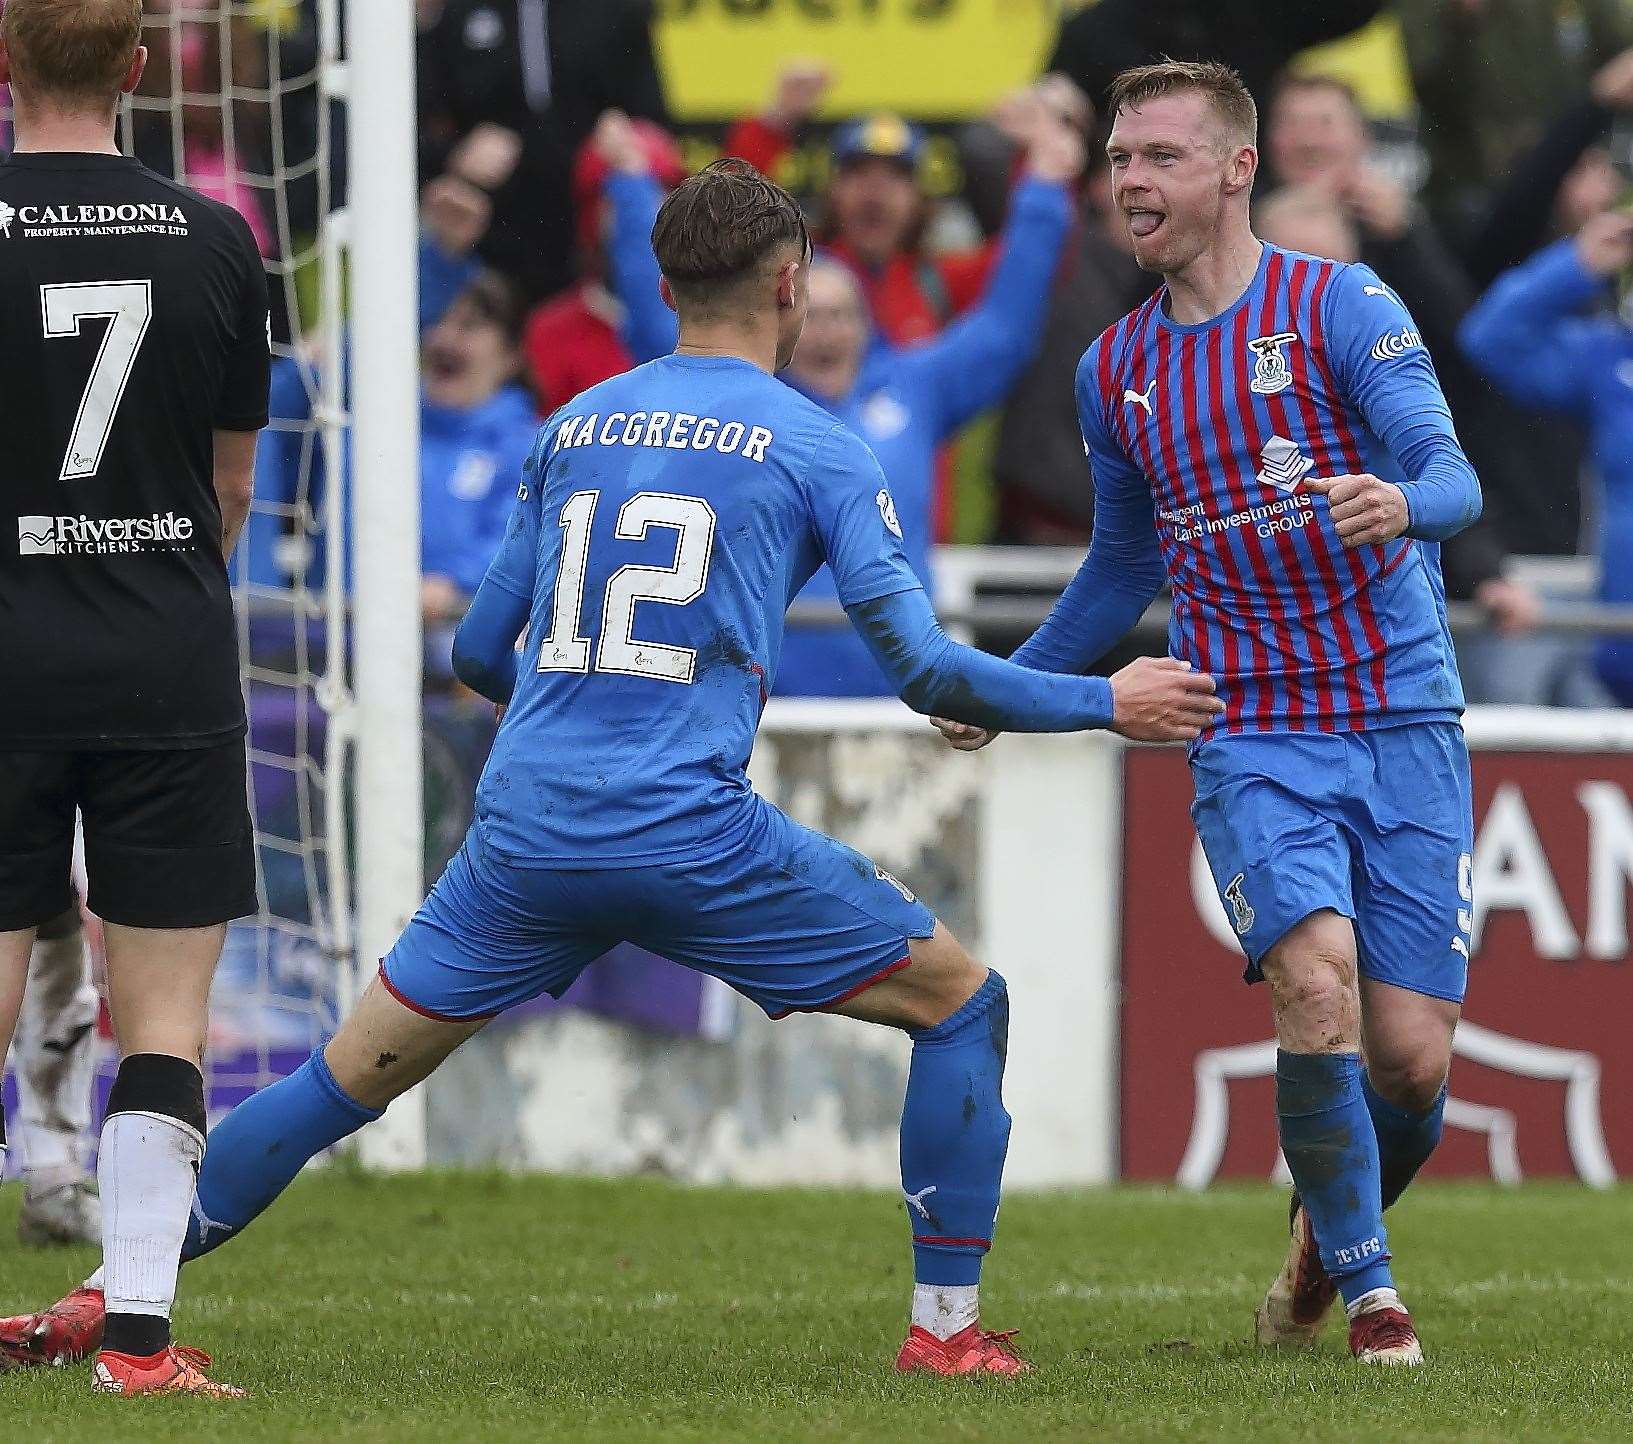 Picture - Ken Macpherson, Inverness. SPFL Trust Trophy 3rd Round. Inverness CT(4) v Elgin City(2). 09.10.21. 2 minutes later, and ICT’s Billy McKay celebrates after scoring his 2nd goal.